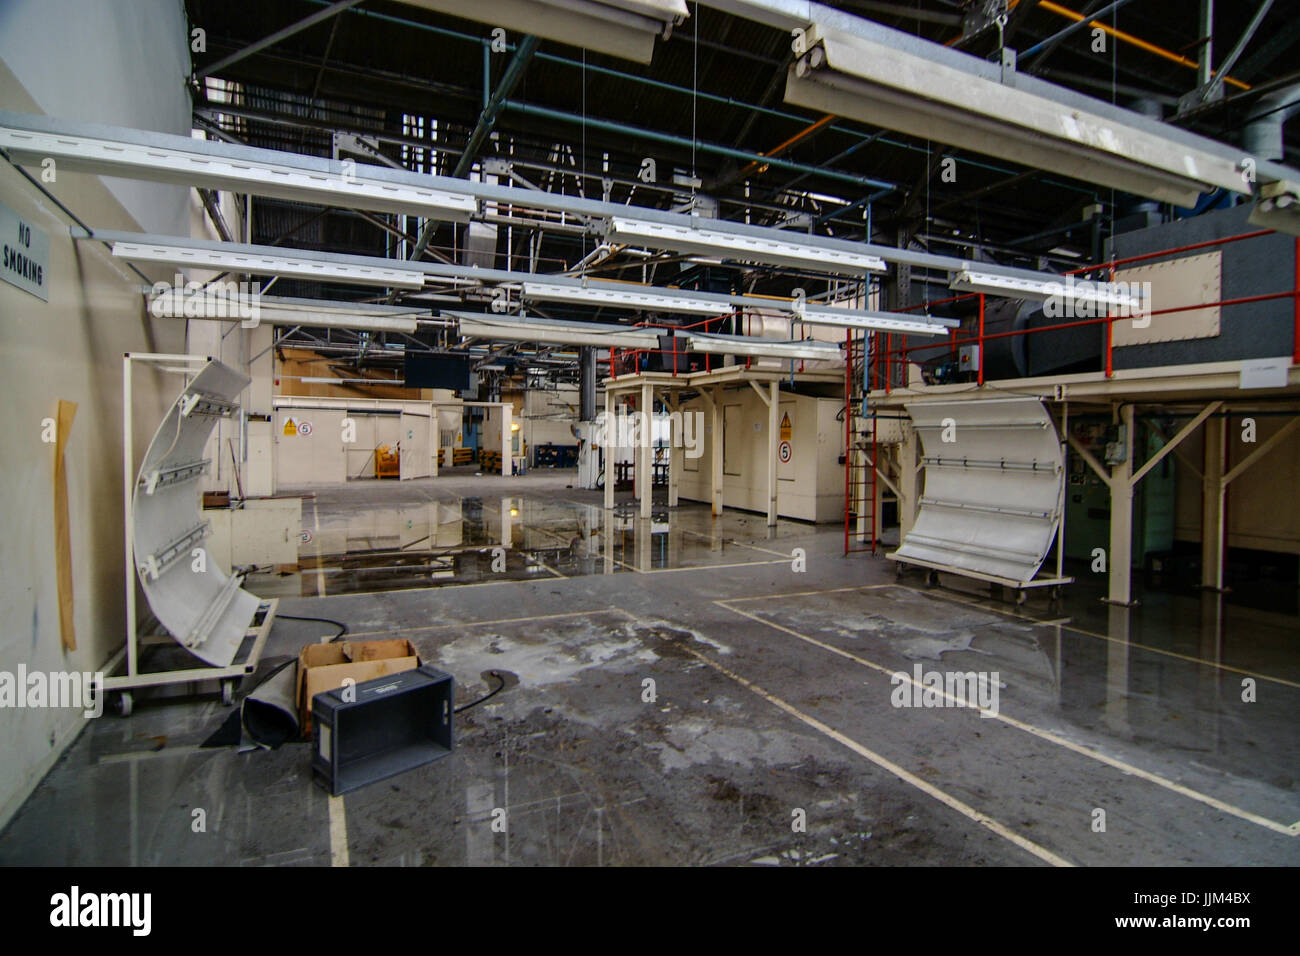 One of the testing areas of the abandoned MG Rover car factory in Longbridge, Birmingham, UK in 2007. Stock Photo